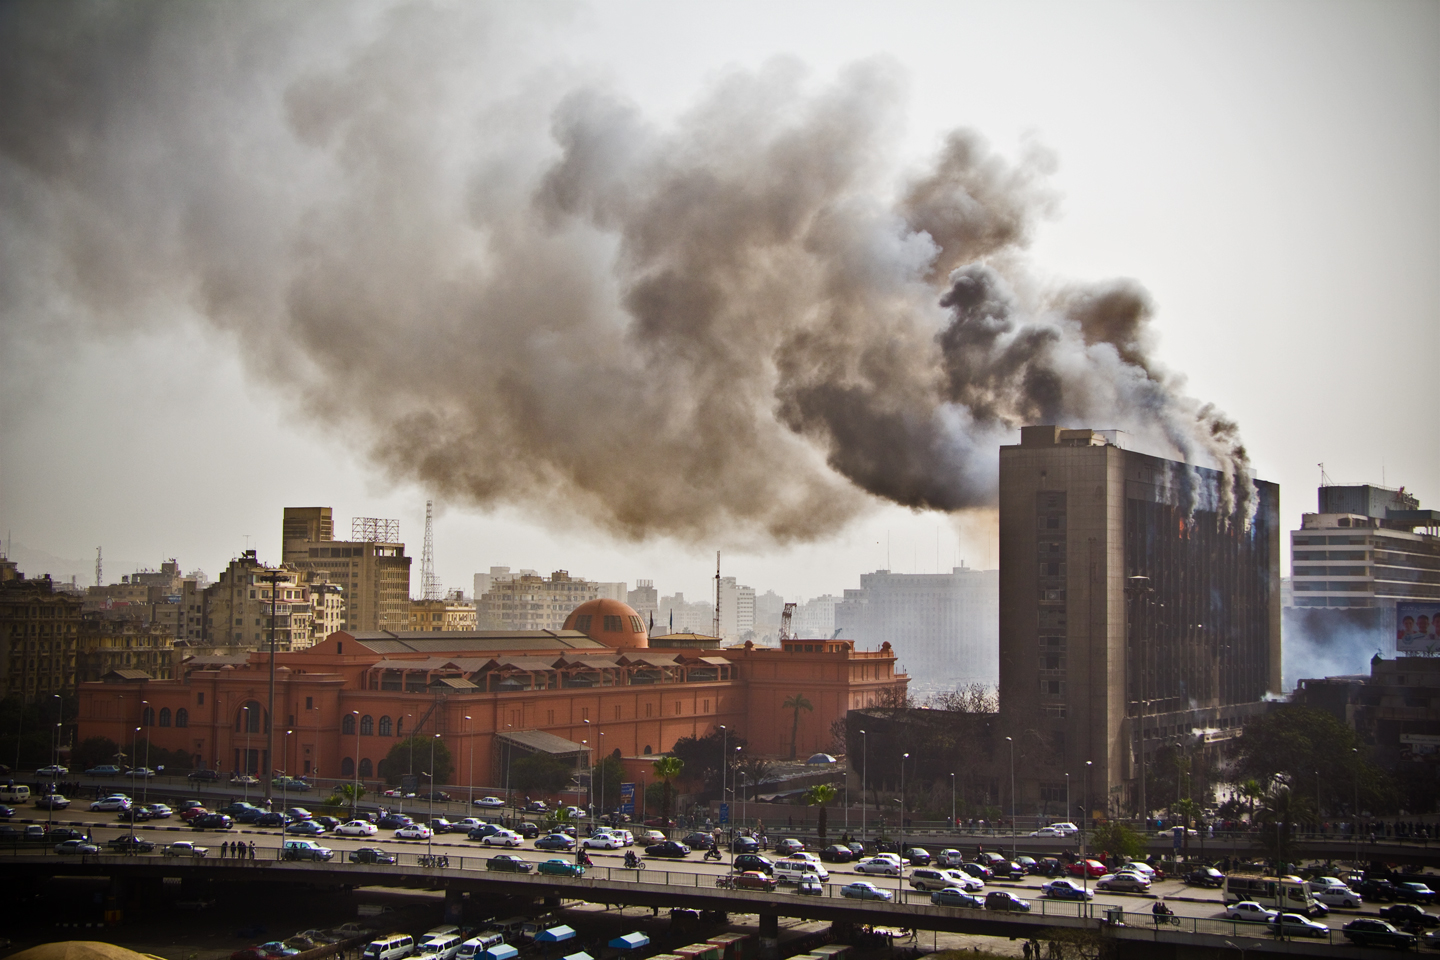 The headquarters of the National Democratic Party, Egypt's ruling political party under Mubarak's rule, burns after being set on fire on January 28, 2011. Photo credit: unkown